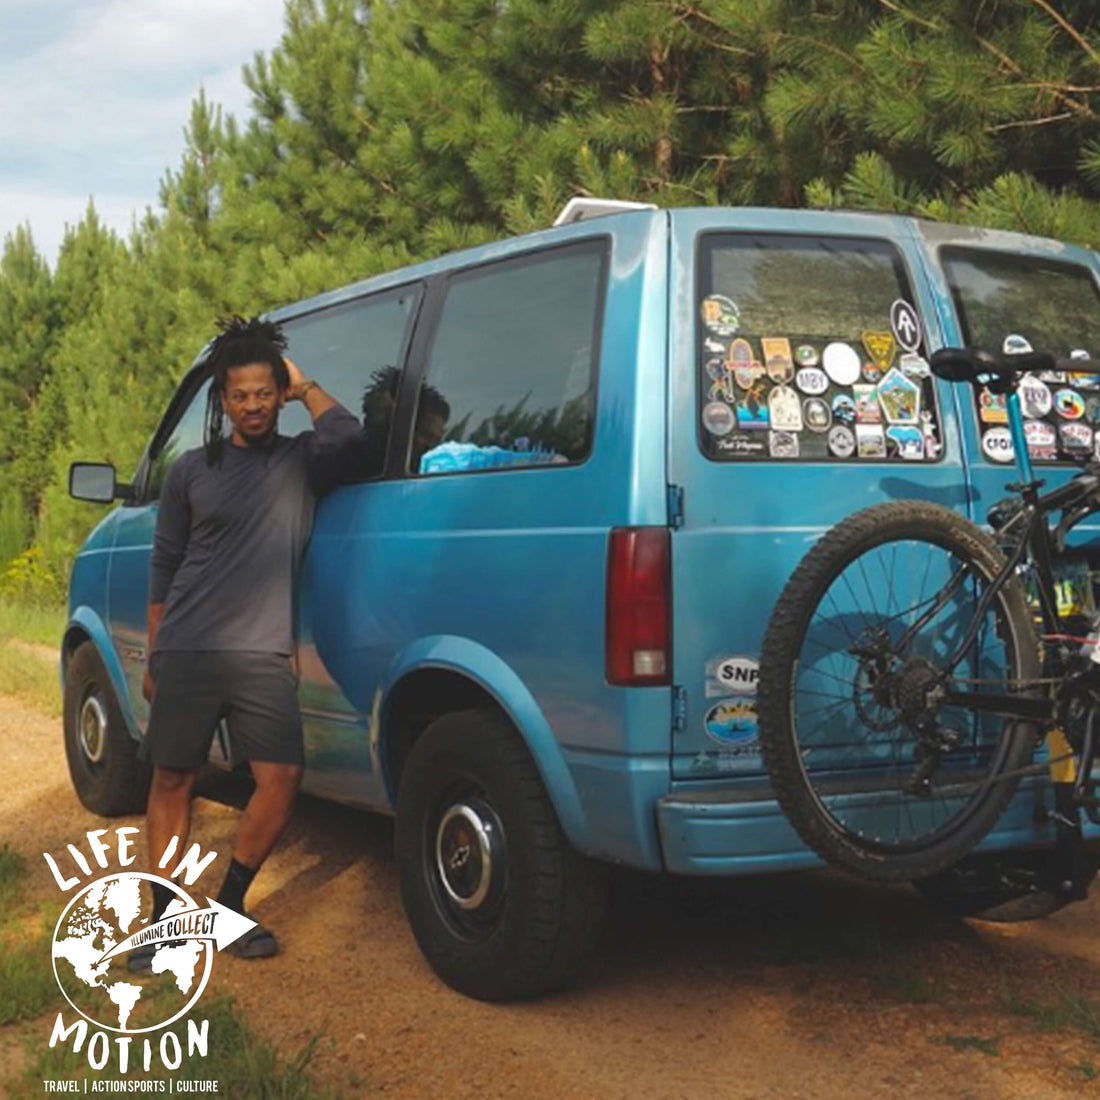 Take Them To A Beautiful Place - Vanlife and inspiring others to get out to explore with James, aka The Ethnic Explorer